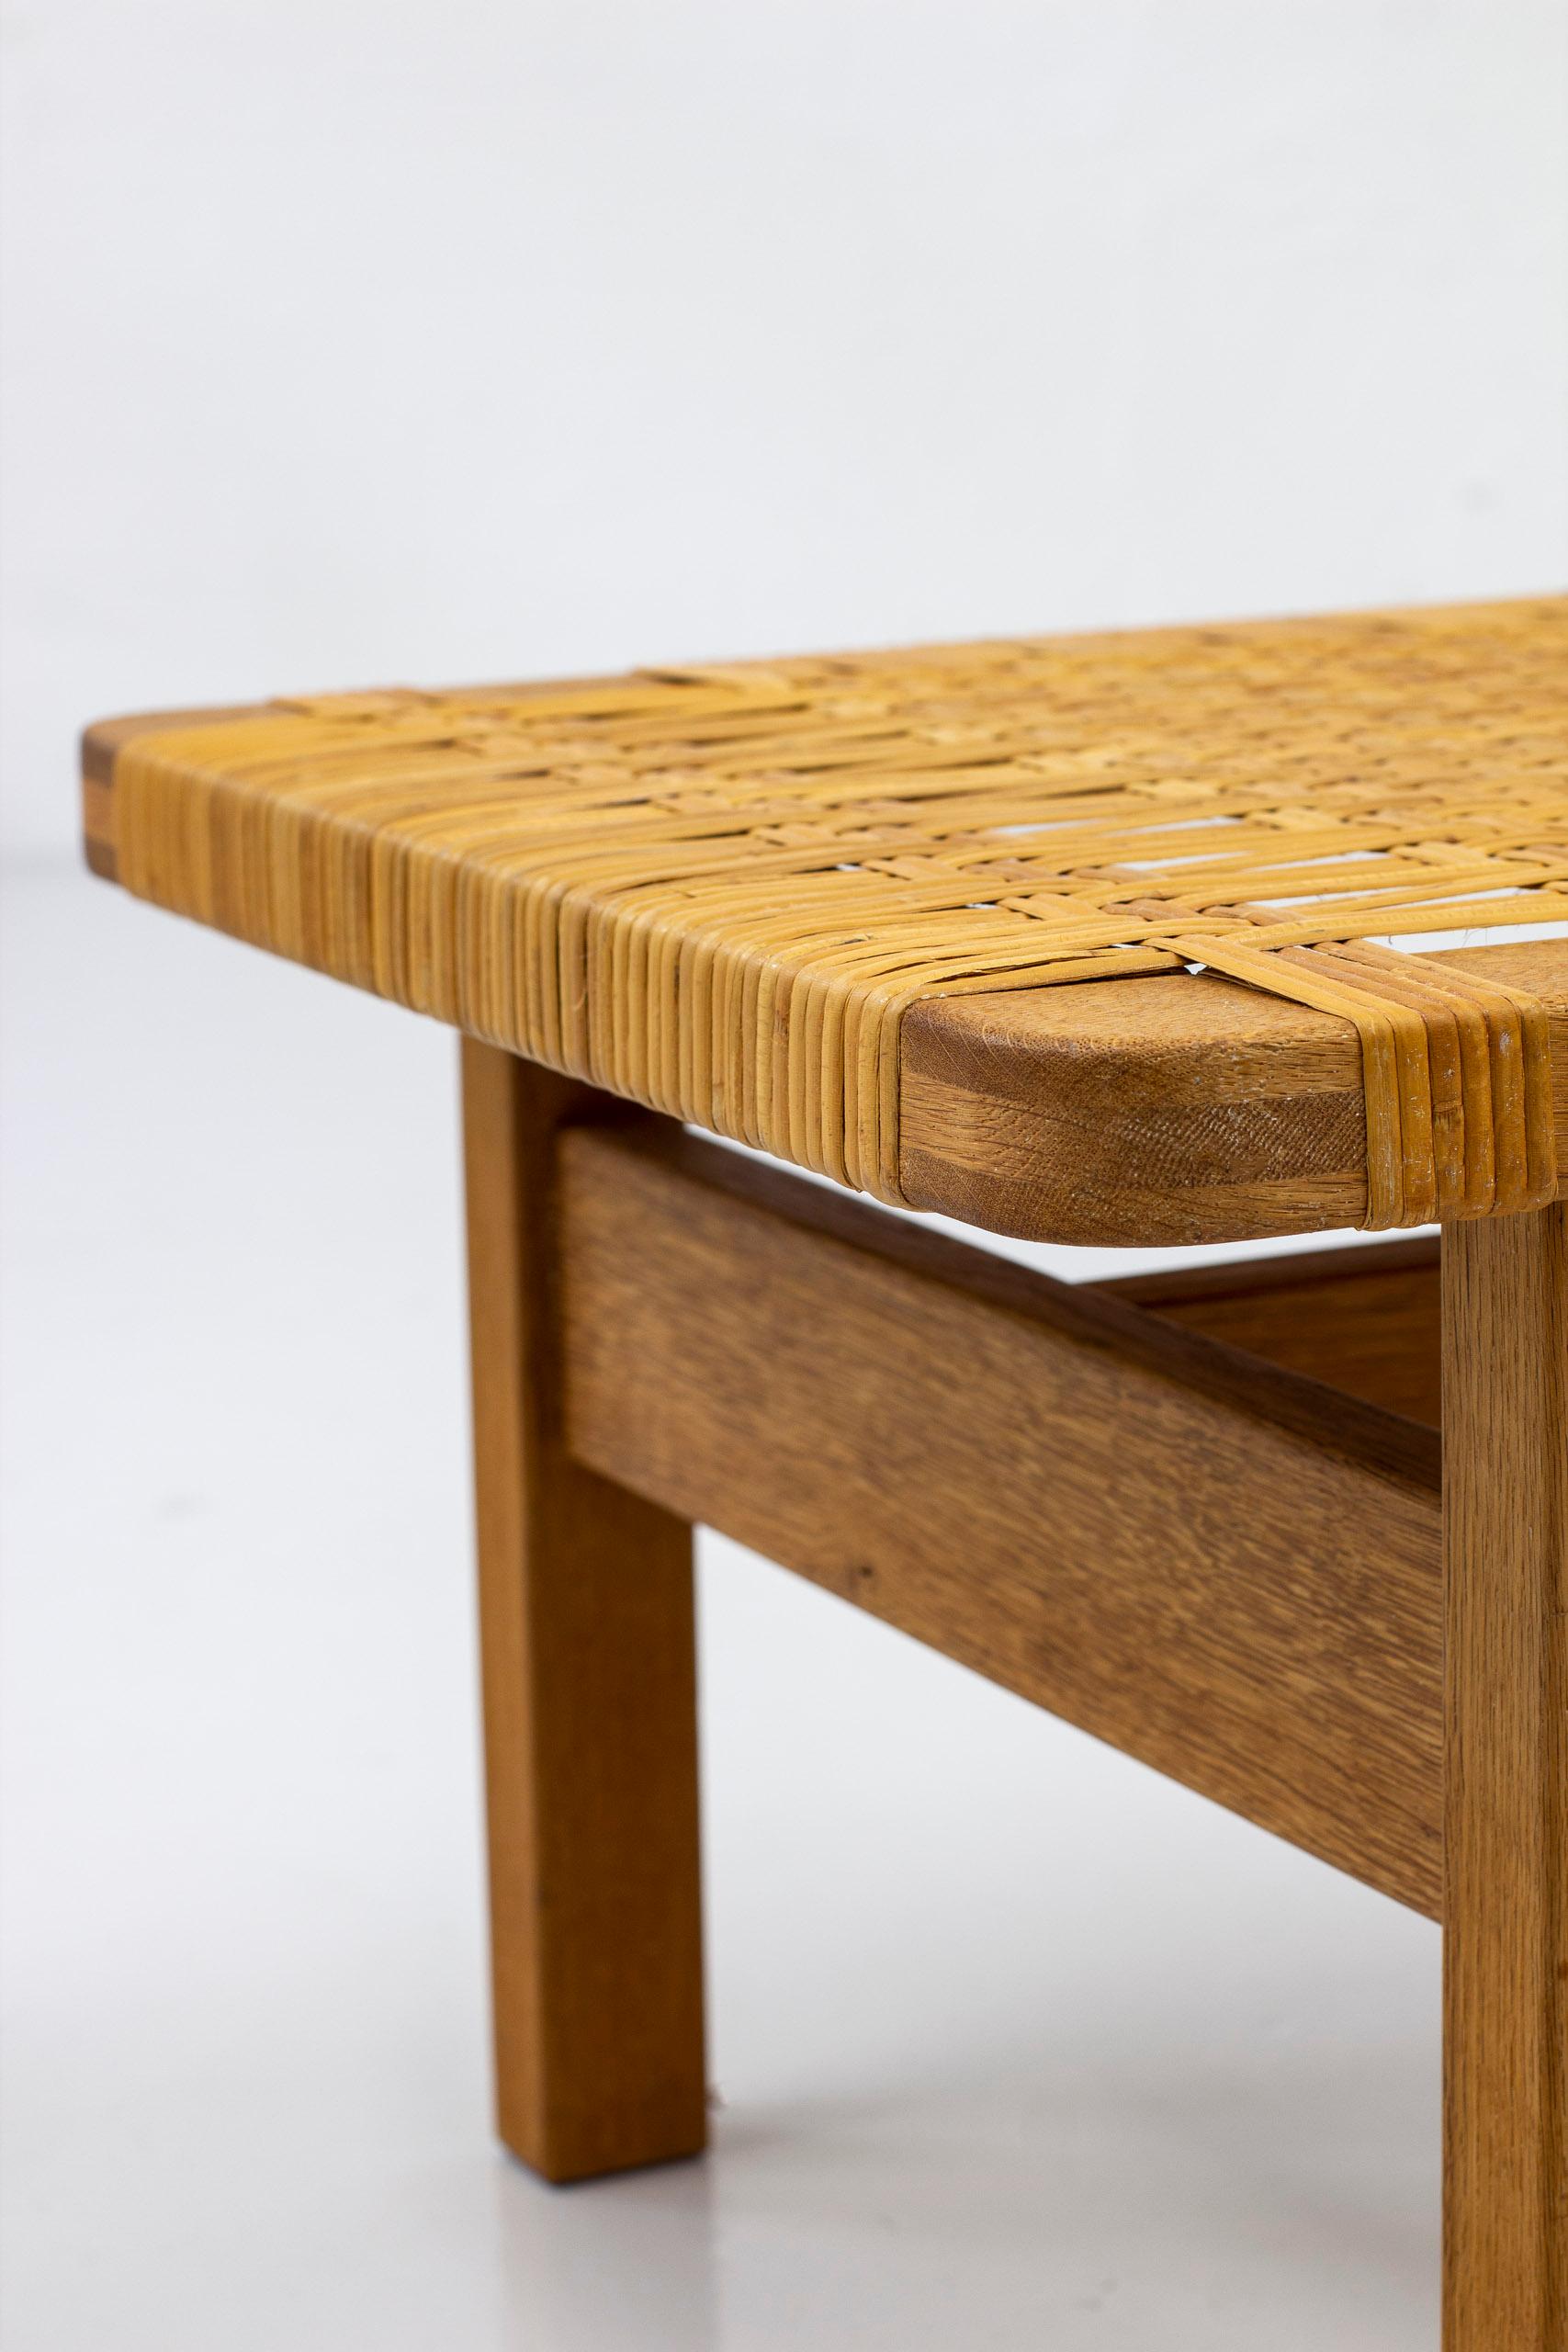 Mid-20th Century Side Table in Oka and Cane by Børge Mogensen for Fredericia, Denmark, 1950s For Sale